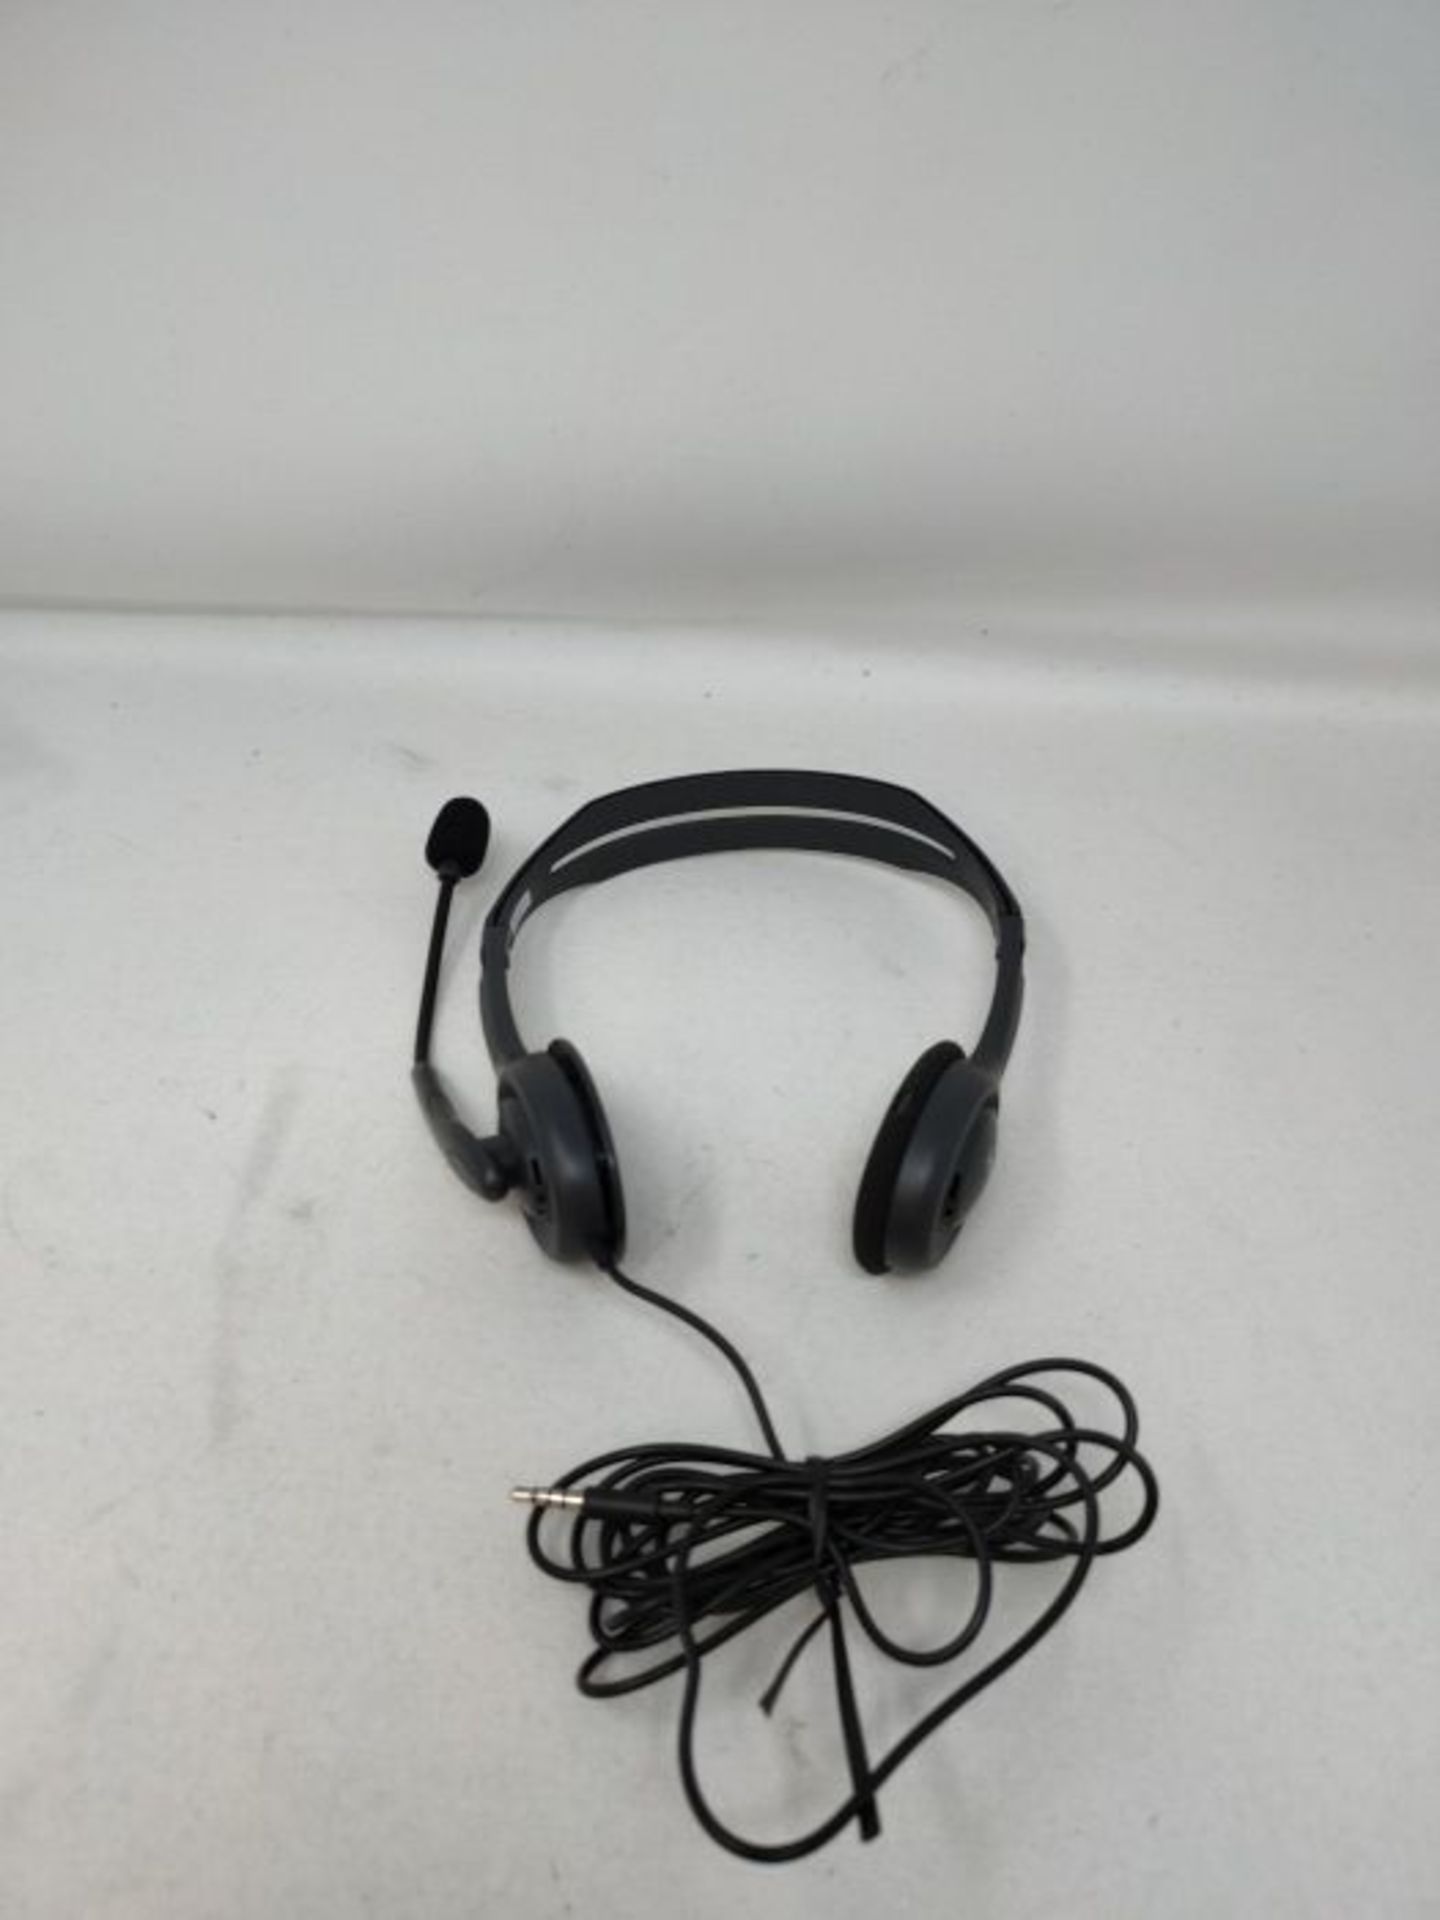 Logitech H111 Wired Headset, Stereo Headphones with Noise-Cancelling Microphone, 3.5 m - Image 2 of 2